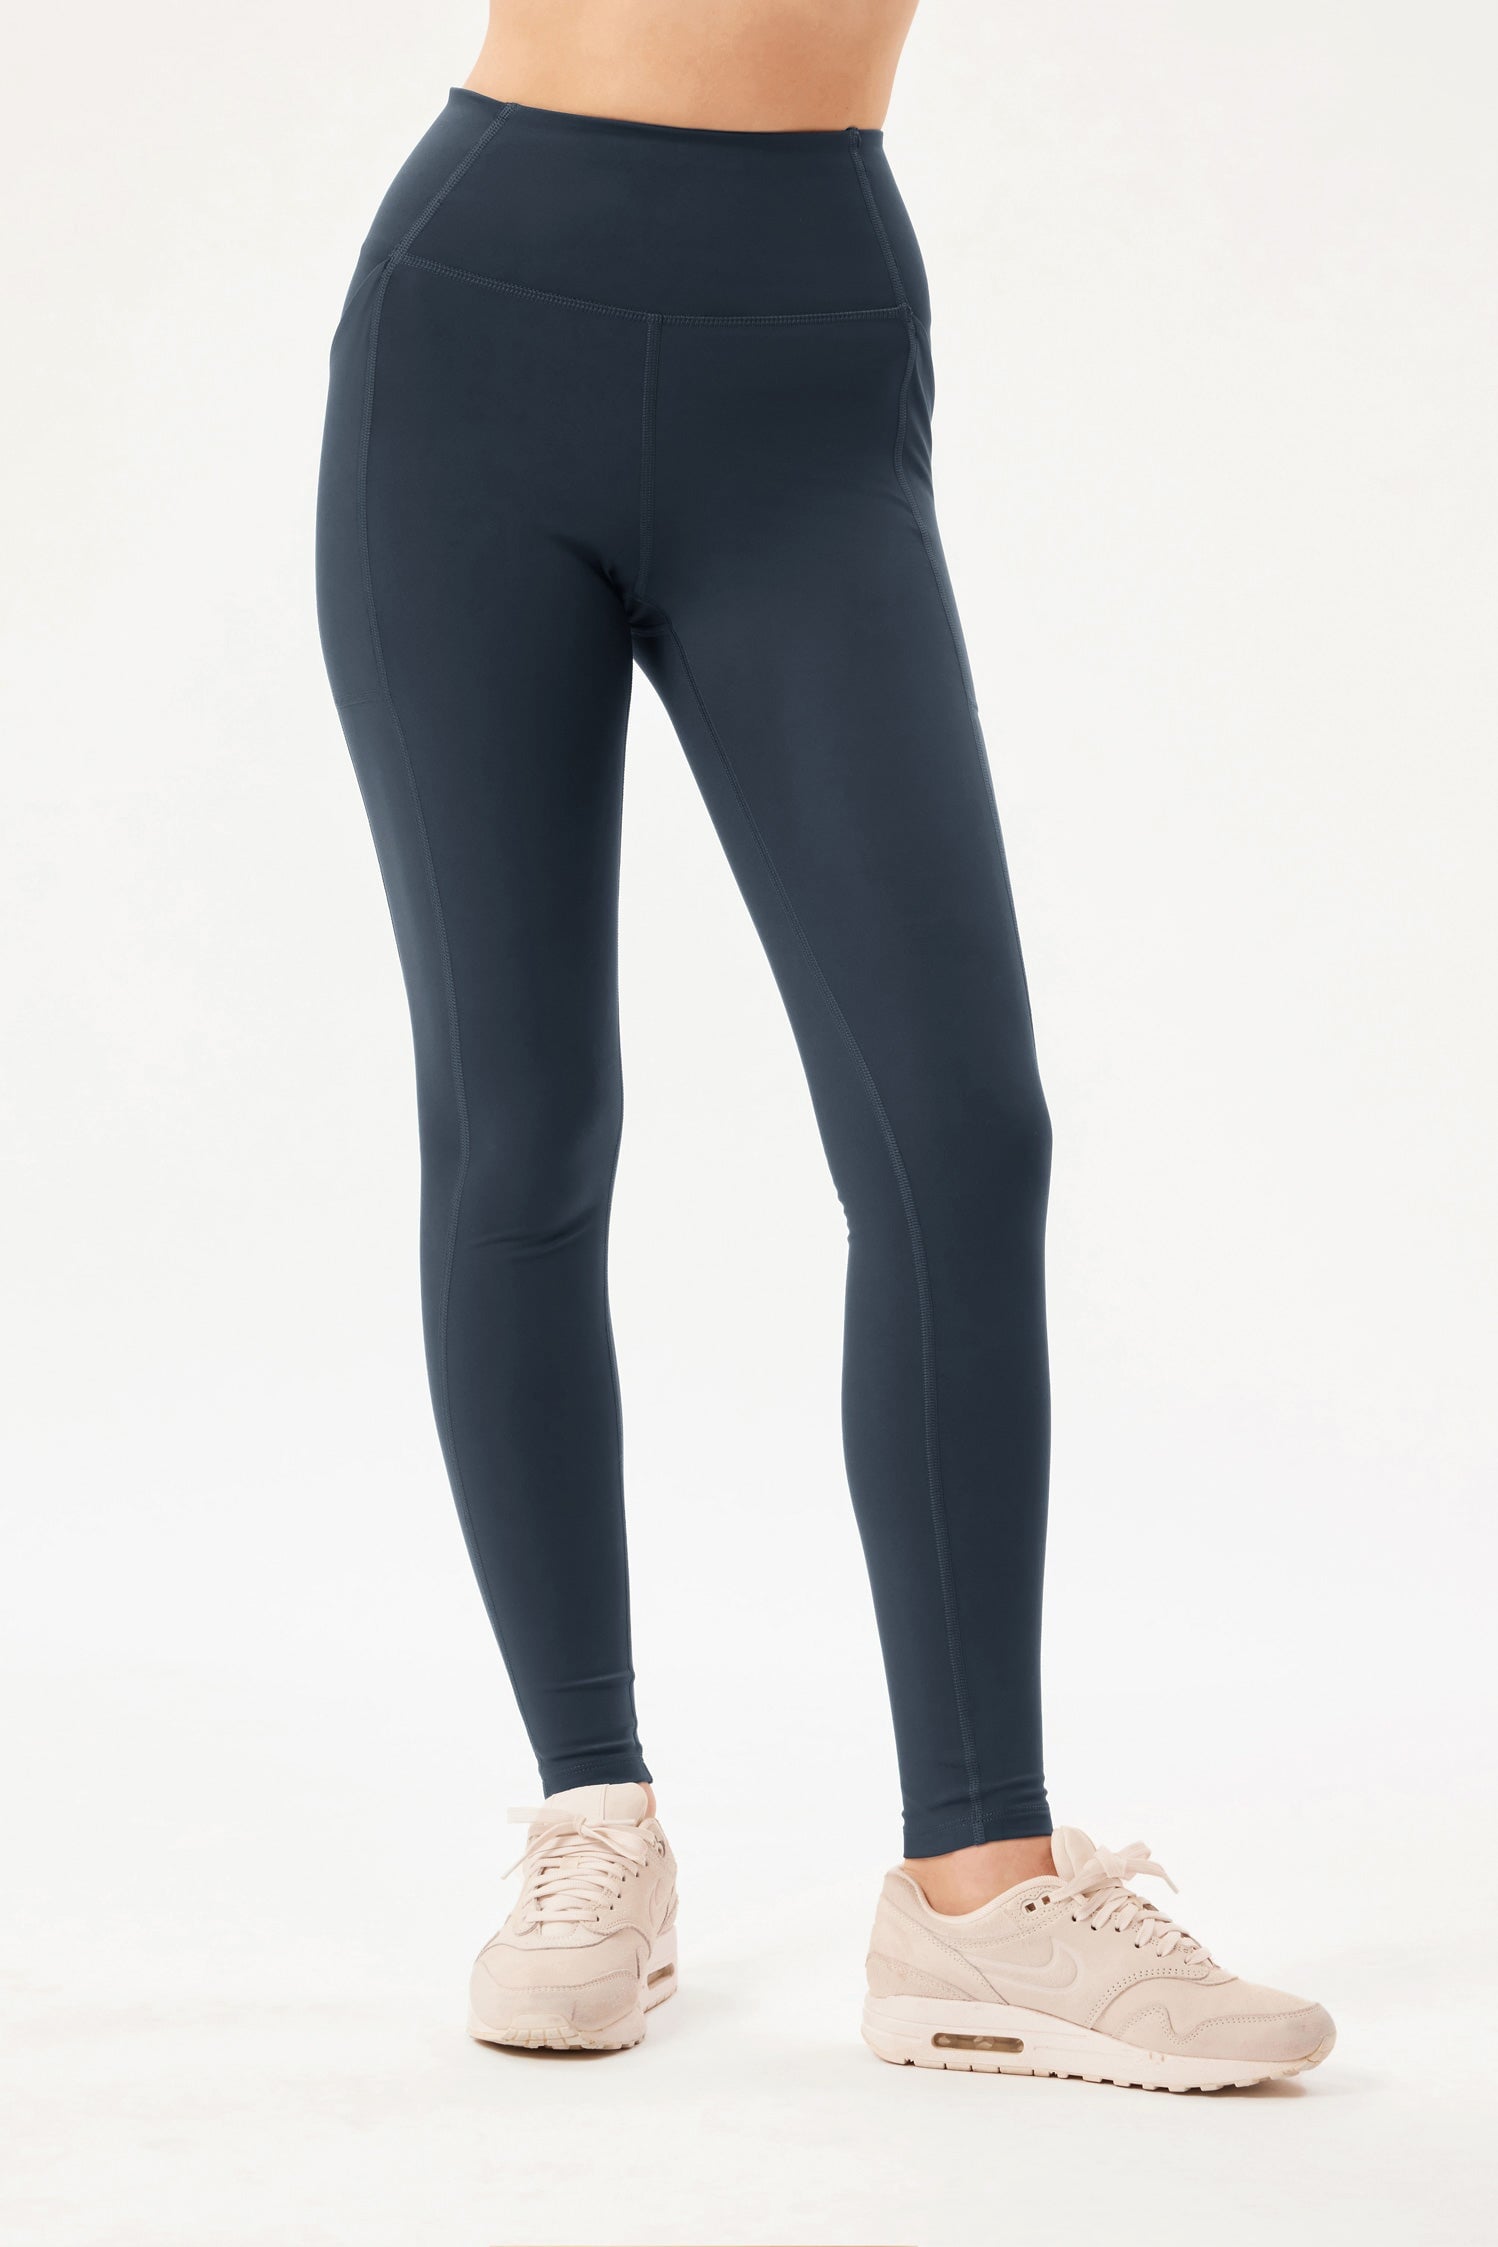 Compressive Leggings with Pockets That Don't Roll Down